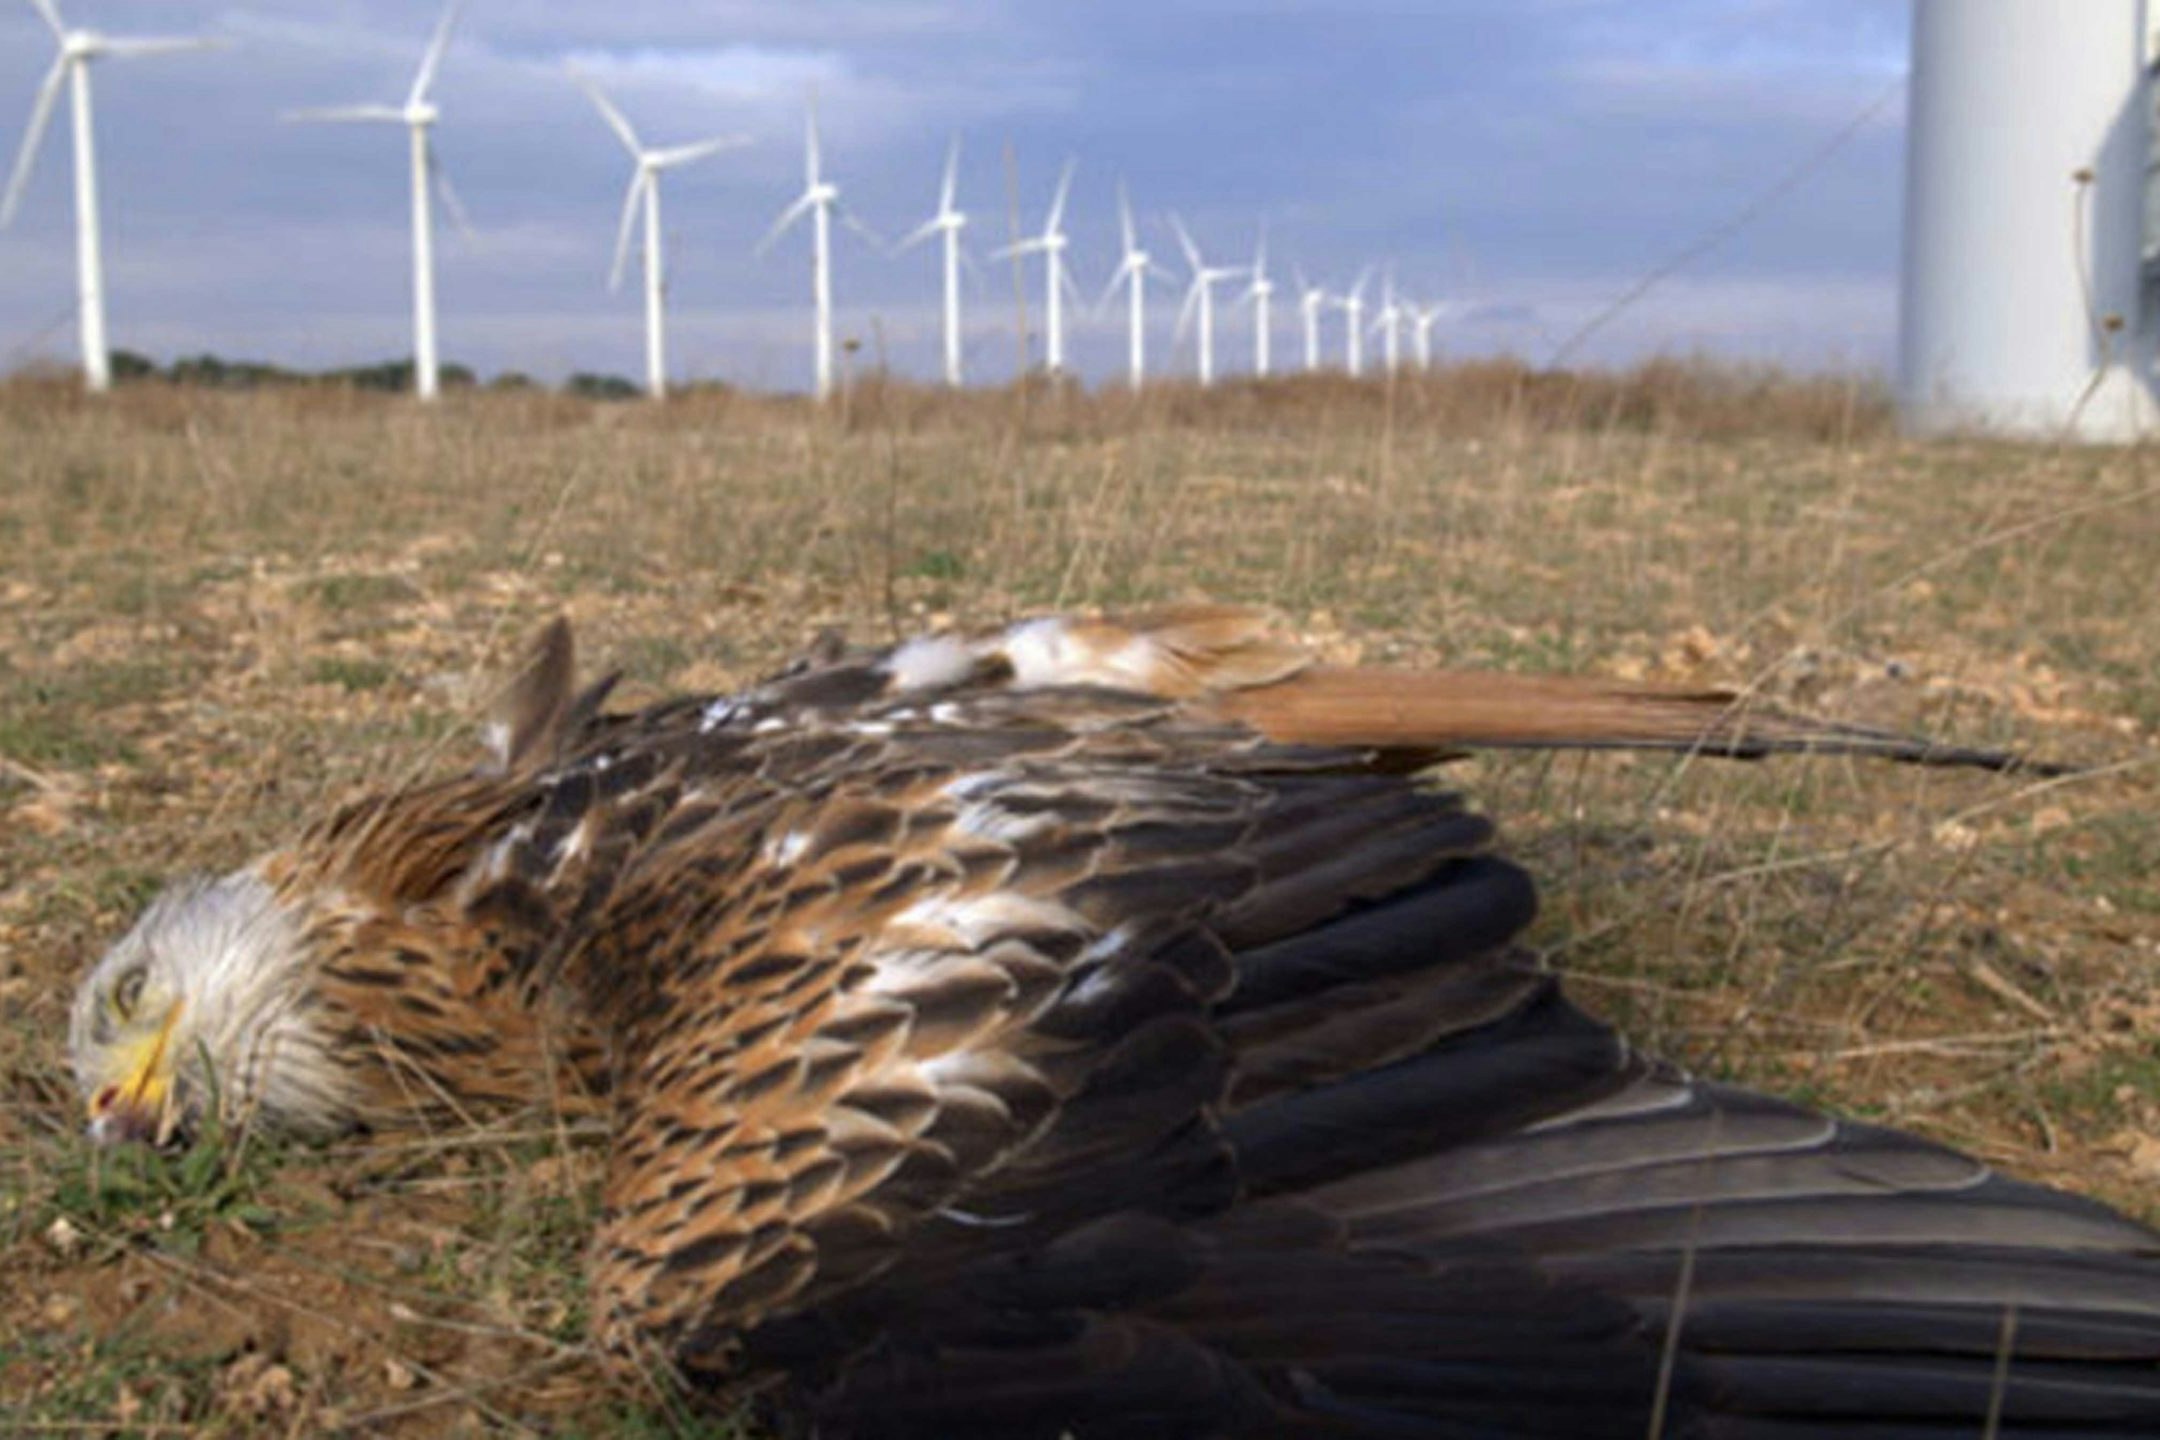 Eagles and other raptors like this European red kite are highly vulnerable to colliding with wind turbines.